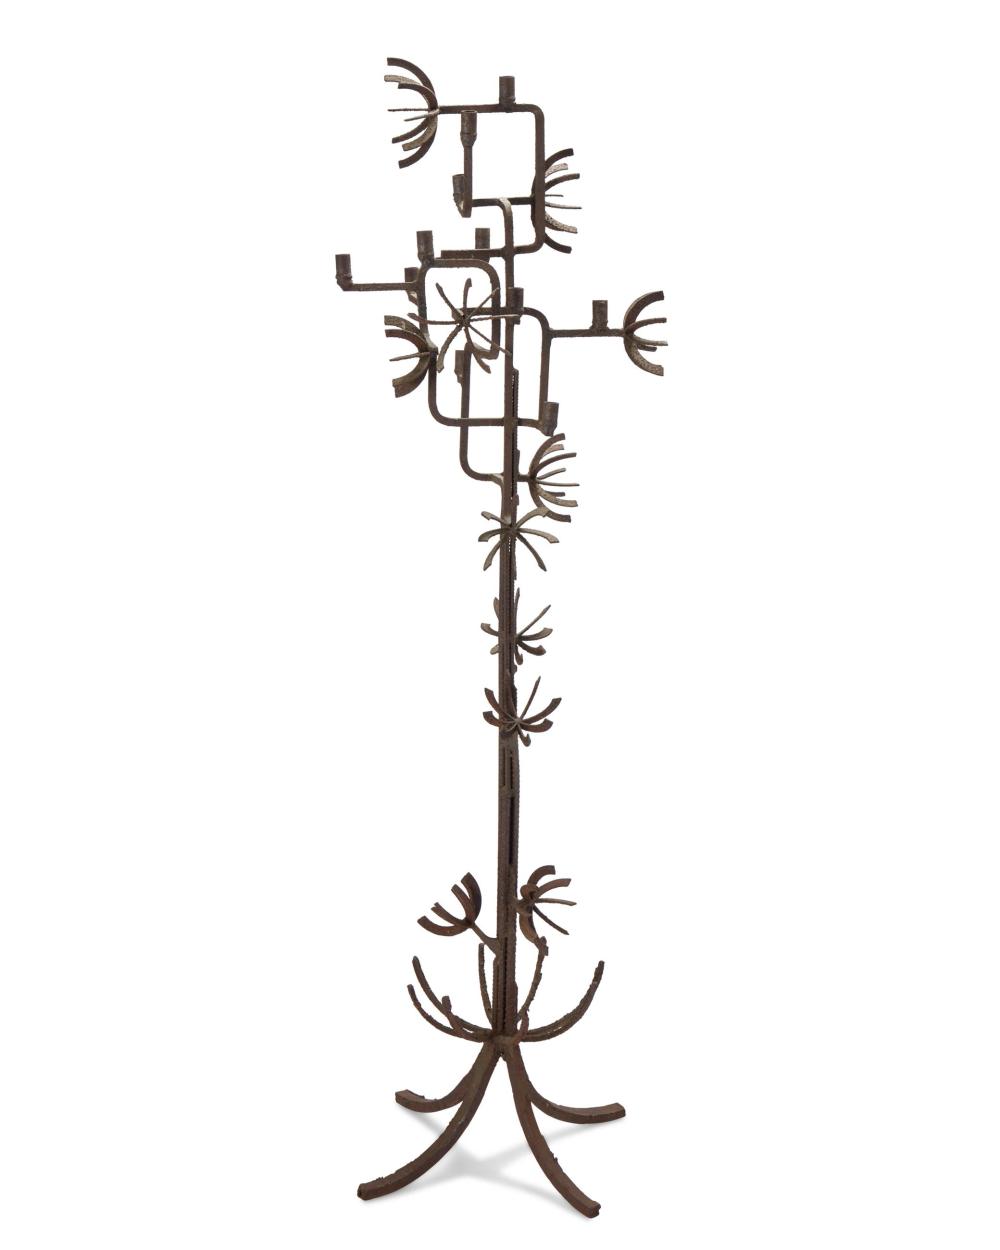 A BRUTALIST STYLE WROUGHT IRON 343c4e